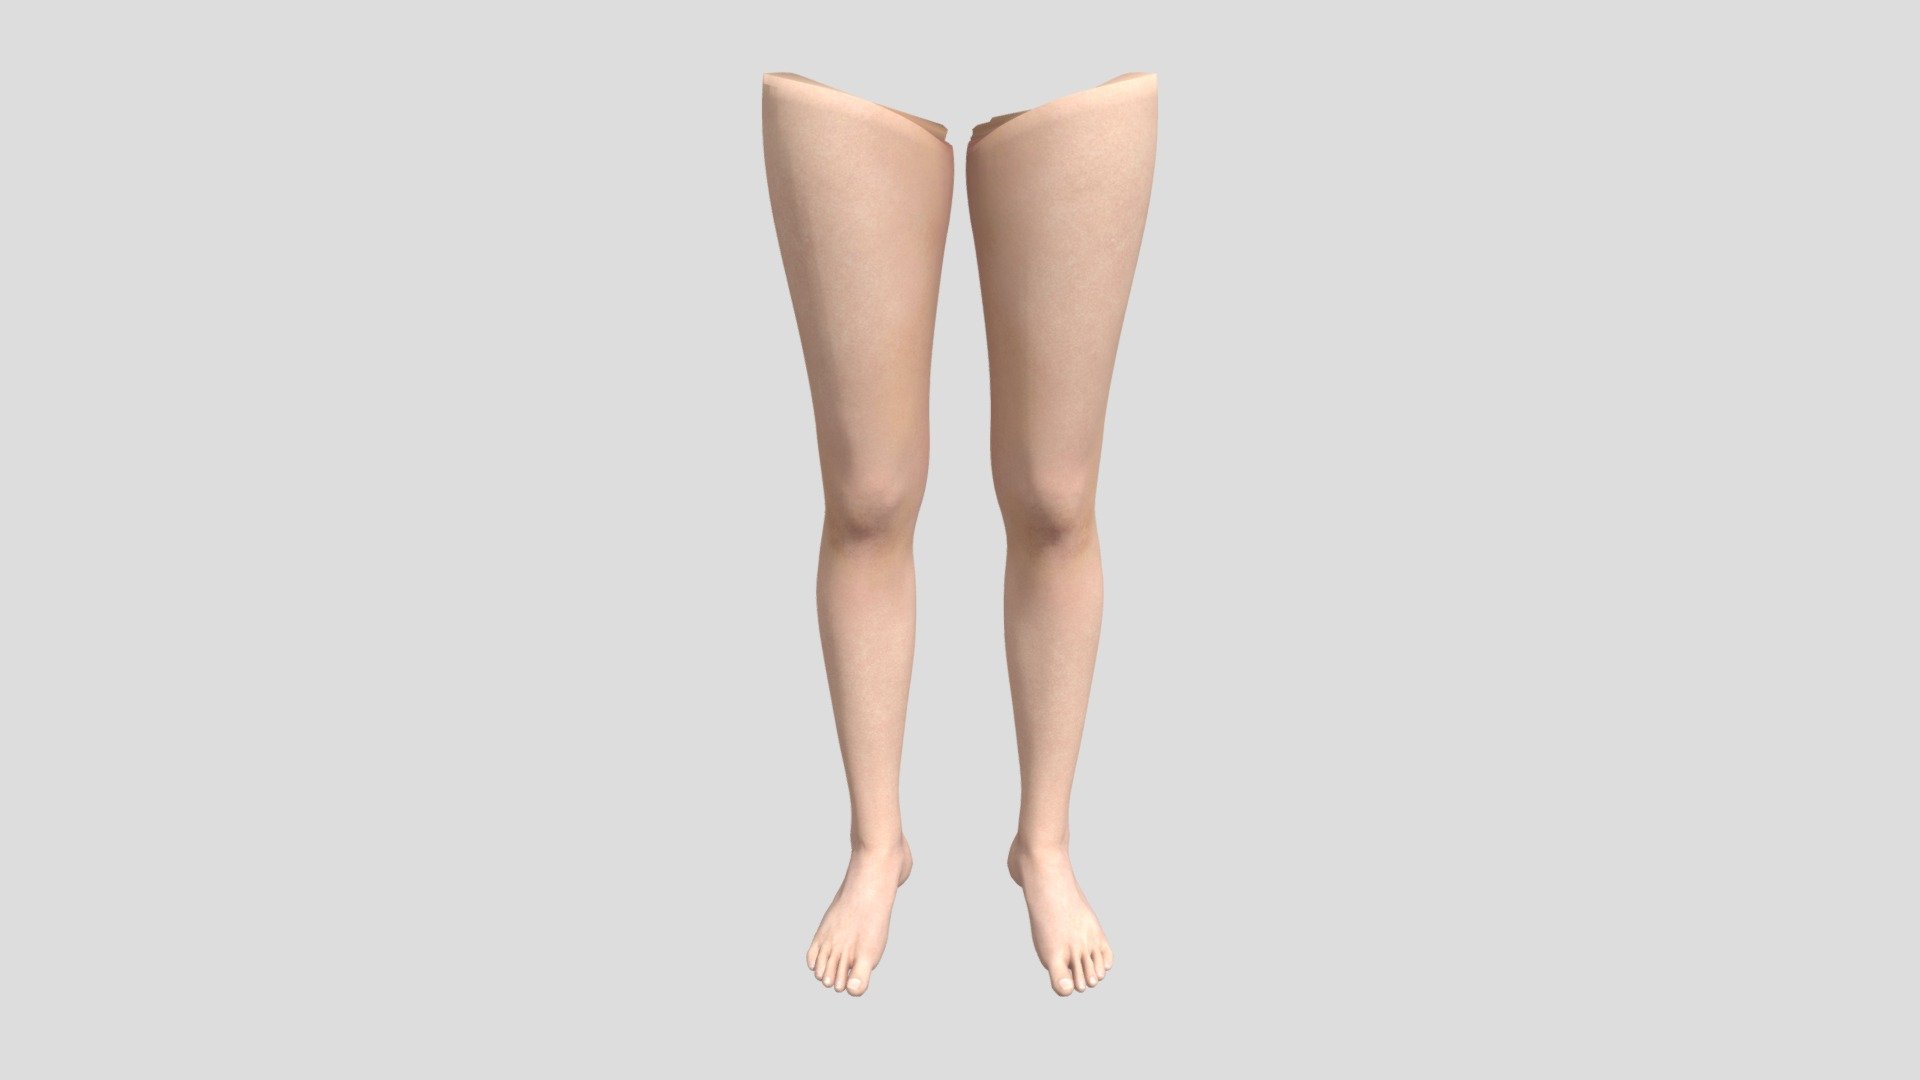 Attractive Women Over The Knee Leg Model.

This model is made for long and short socks design.


Our Services:

3D Apparel Design.

OBJ,FBX,GLTF Making with High/Low Poly.

Fabric Digitalization.

Mockup making.

3D Teck Pack.

Pattern Making.

2D Illustration.

Cloth Animation and 360 Spin Video.


Contact us:- 

Email: info@digitalfashionwear.com 

Website: https://digitalfashionwear.com 

WhatsApp No: +8801759350445 


We designed all the types of cloth specially focused on product visualization, e-commerce, fitting, and production. 

We will design: 

T-shirts 

Polo shirts 

Hoodies 

Sweatshirt 

Jackets 

Shirts 

TankTops 

Trousers 

Bras 

Underwear 

Blazer 

Aprons 

Leggings 

and All Fashion items. 





Our goal is to make sure what we provide you, meets your demand 3d model